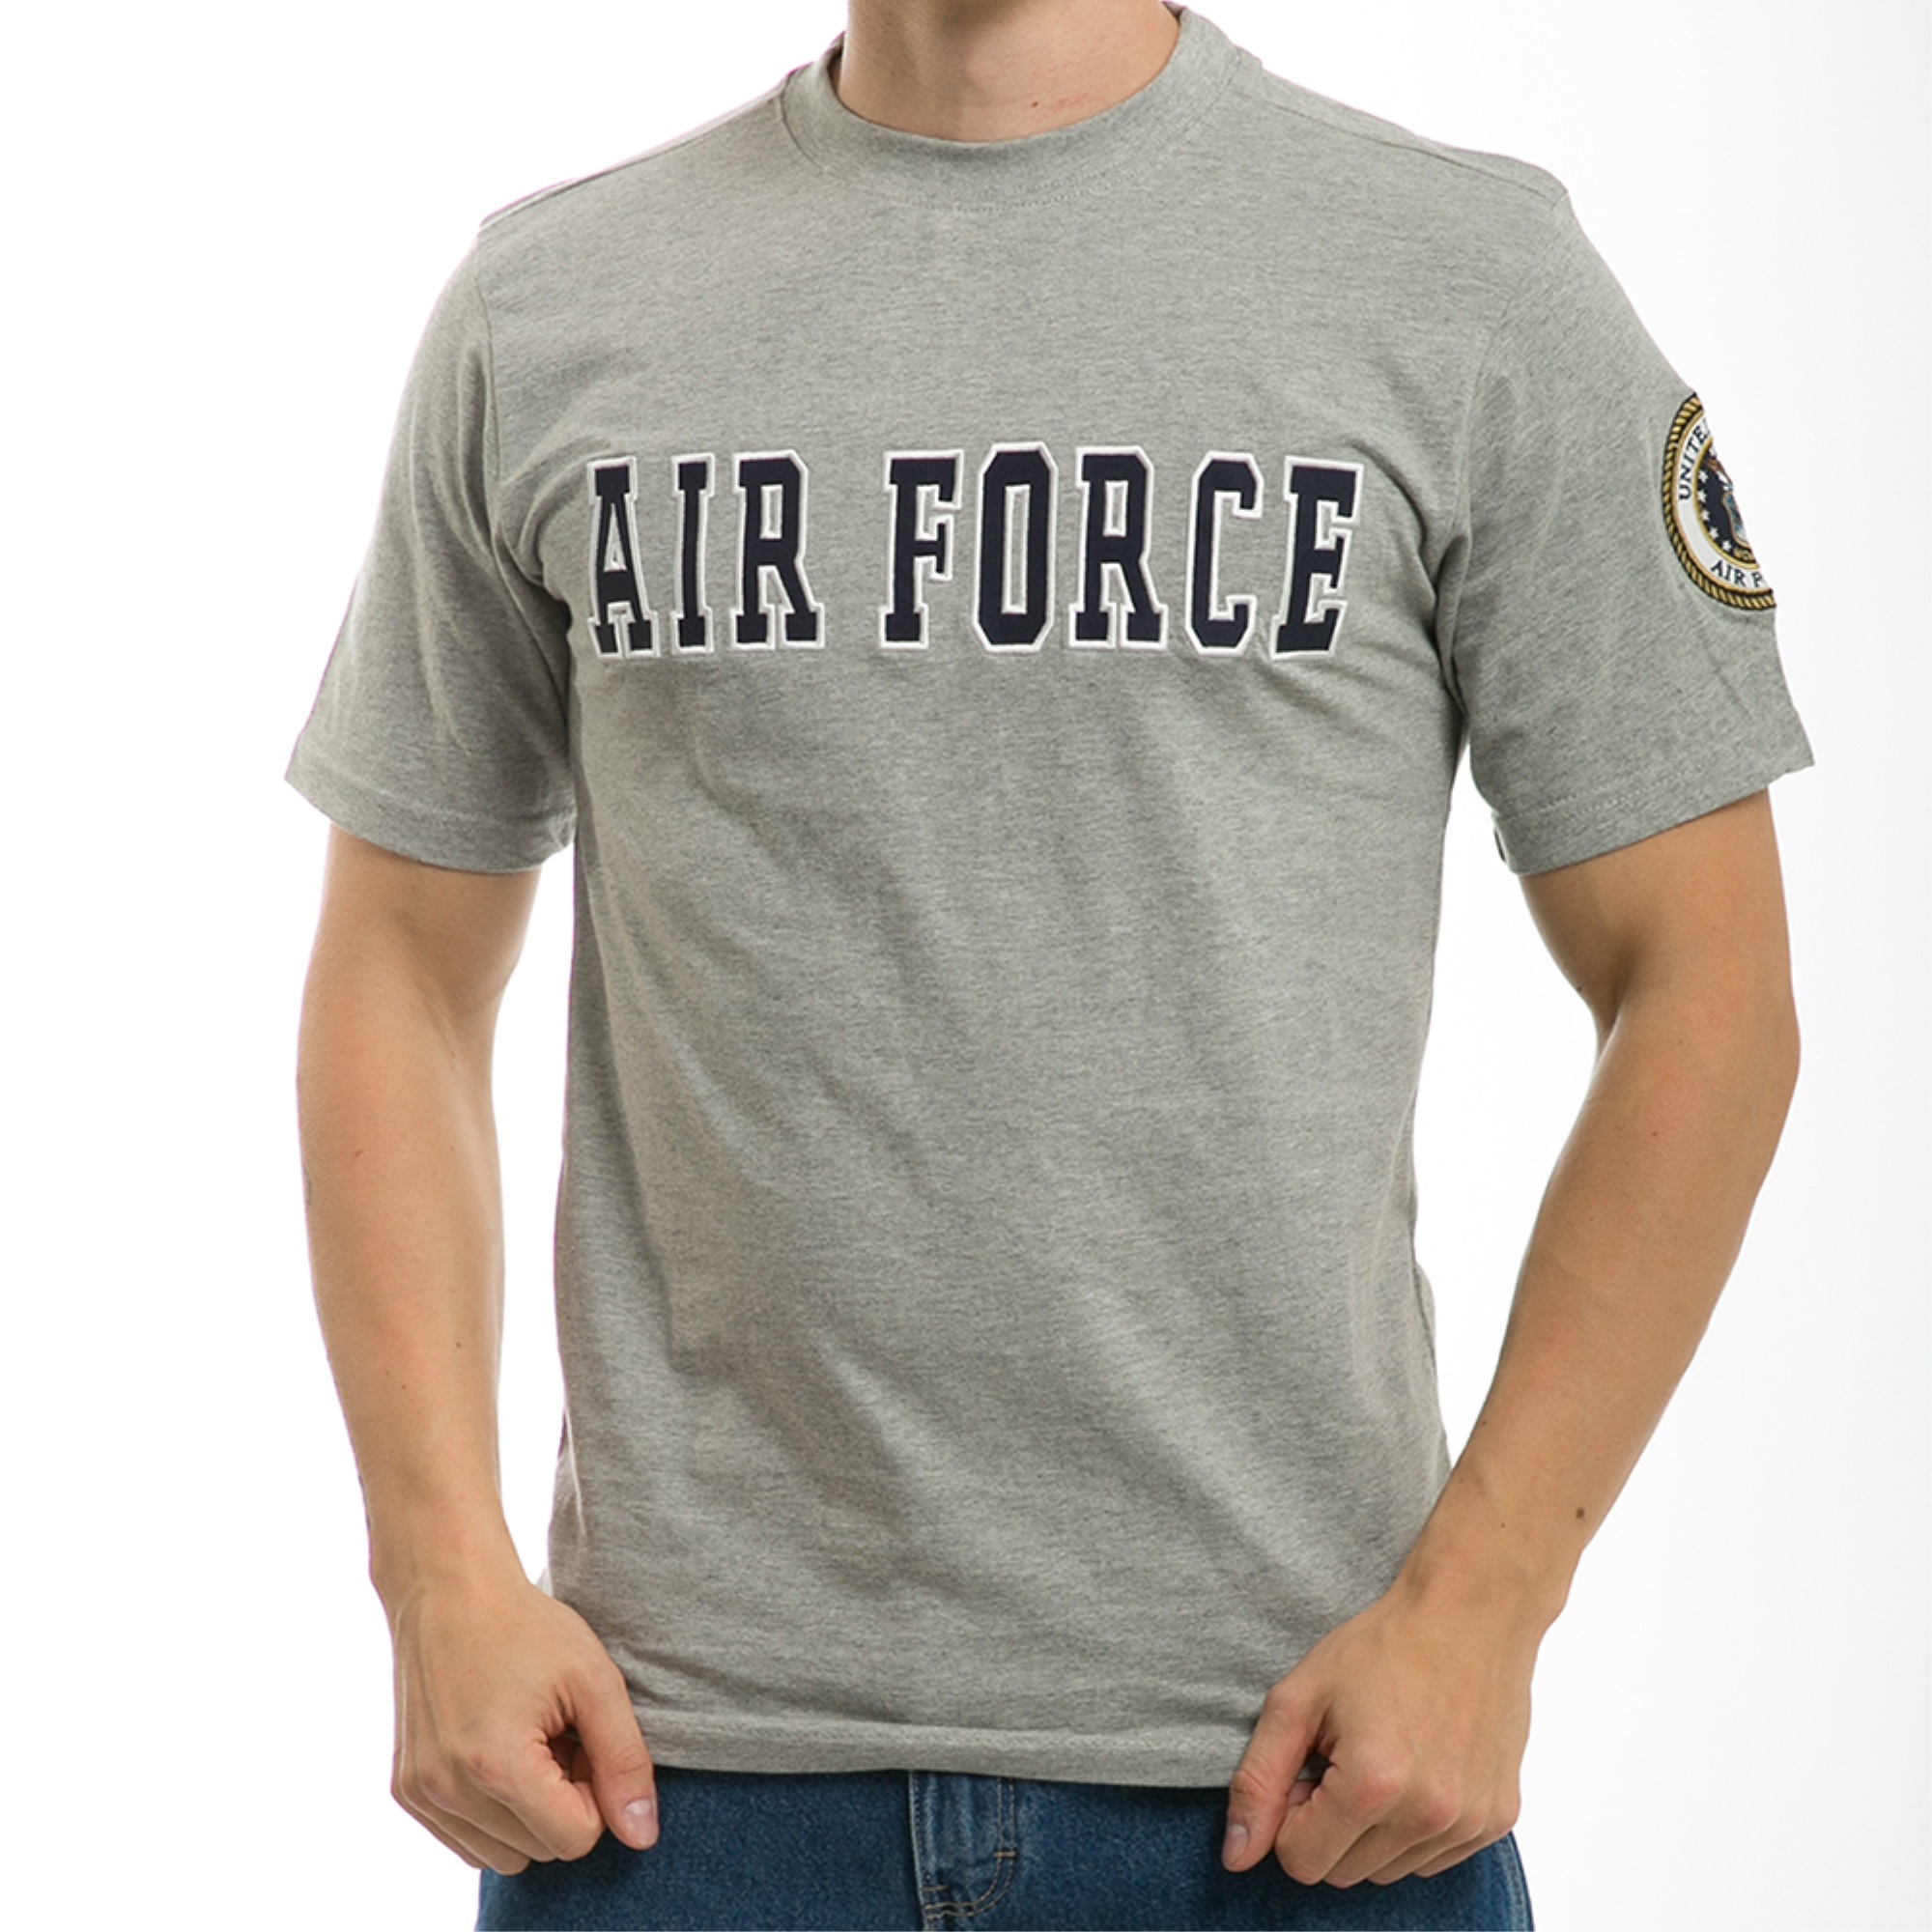 Rapid Dominance Applique Text T's, Air Force, Grey, 2X